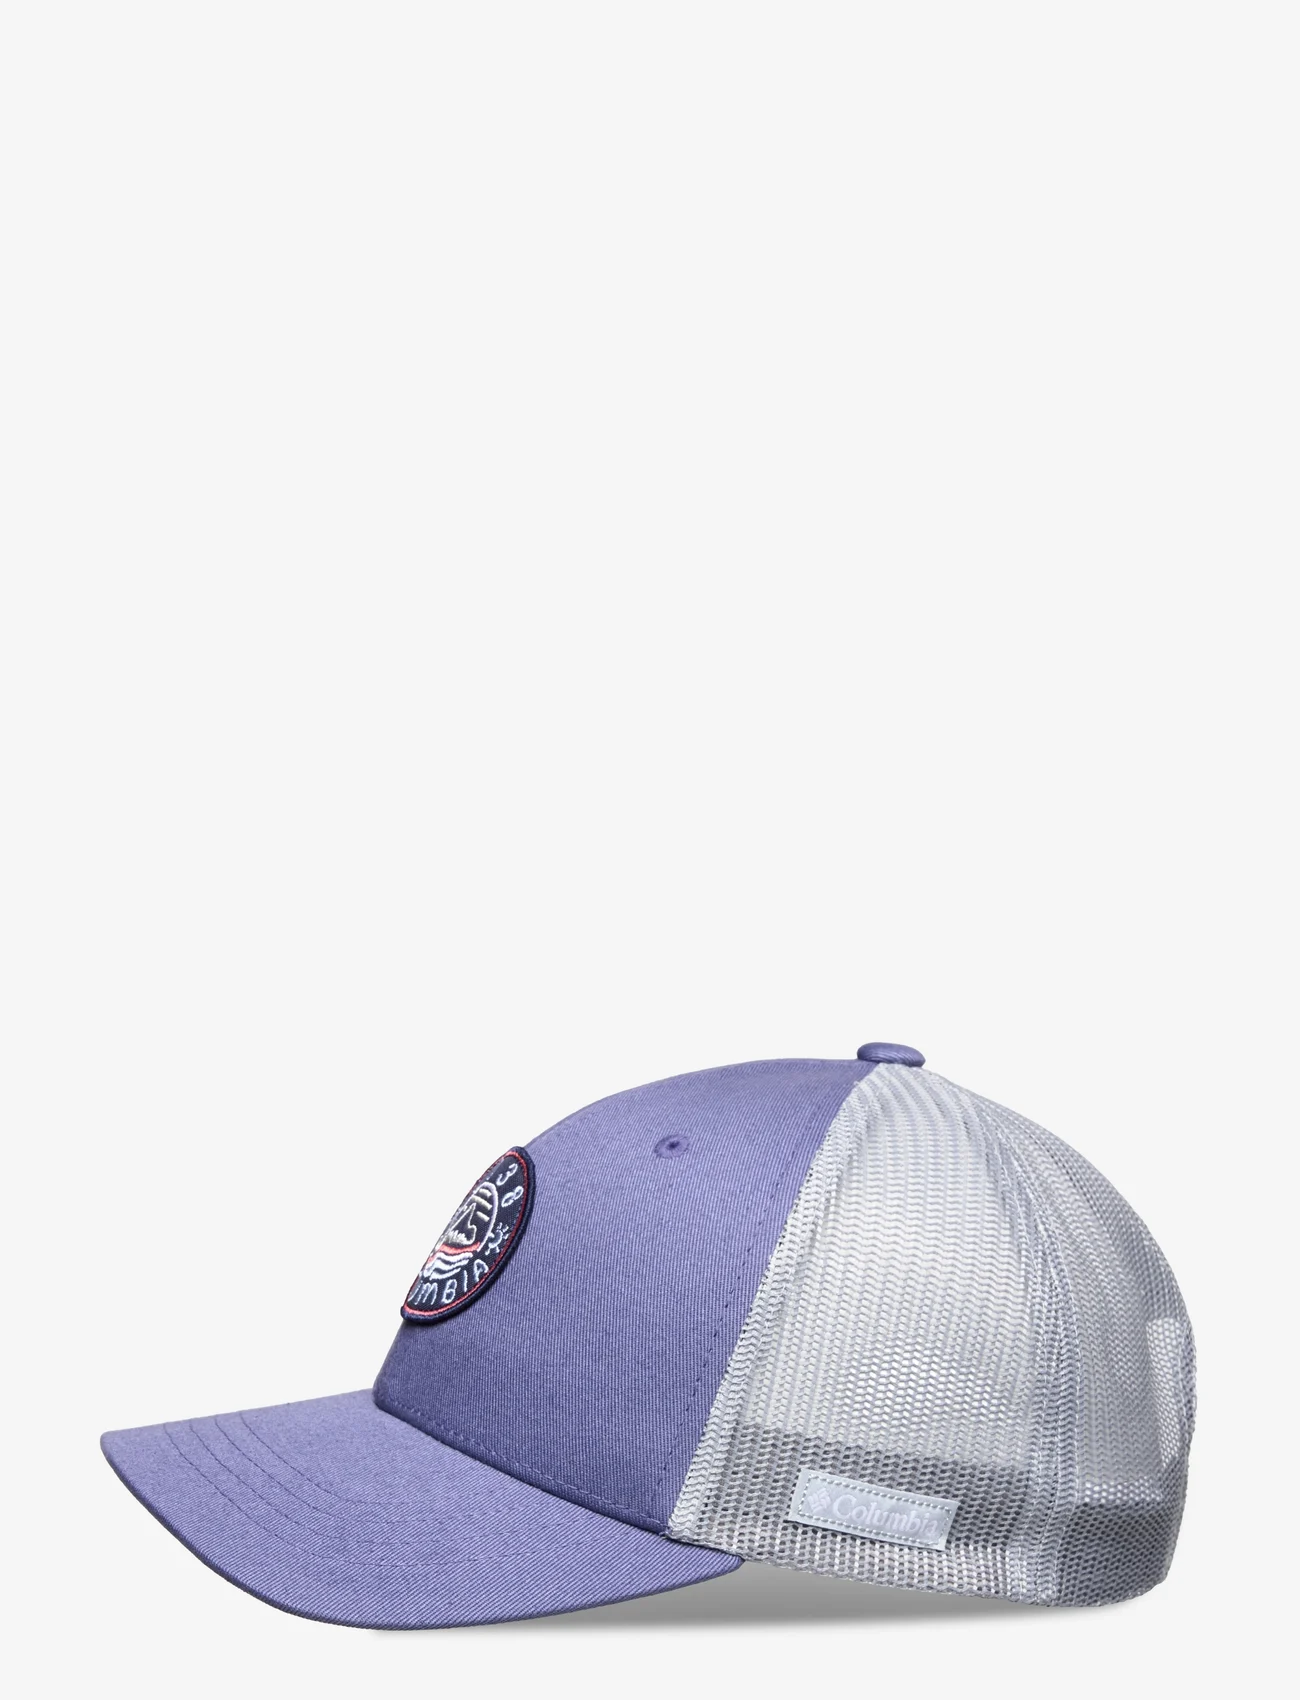 Columbia Sportswear - Columbia Youth Snap Back - gode sommertilbud - eve, cirrus grey, hot marker waves - 1